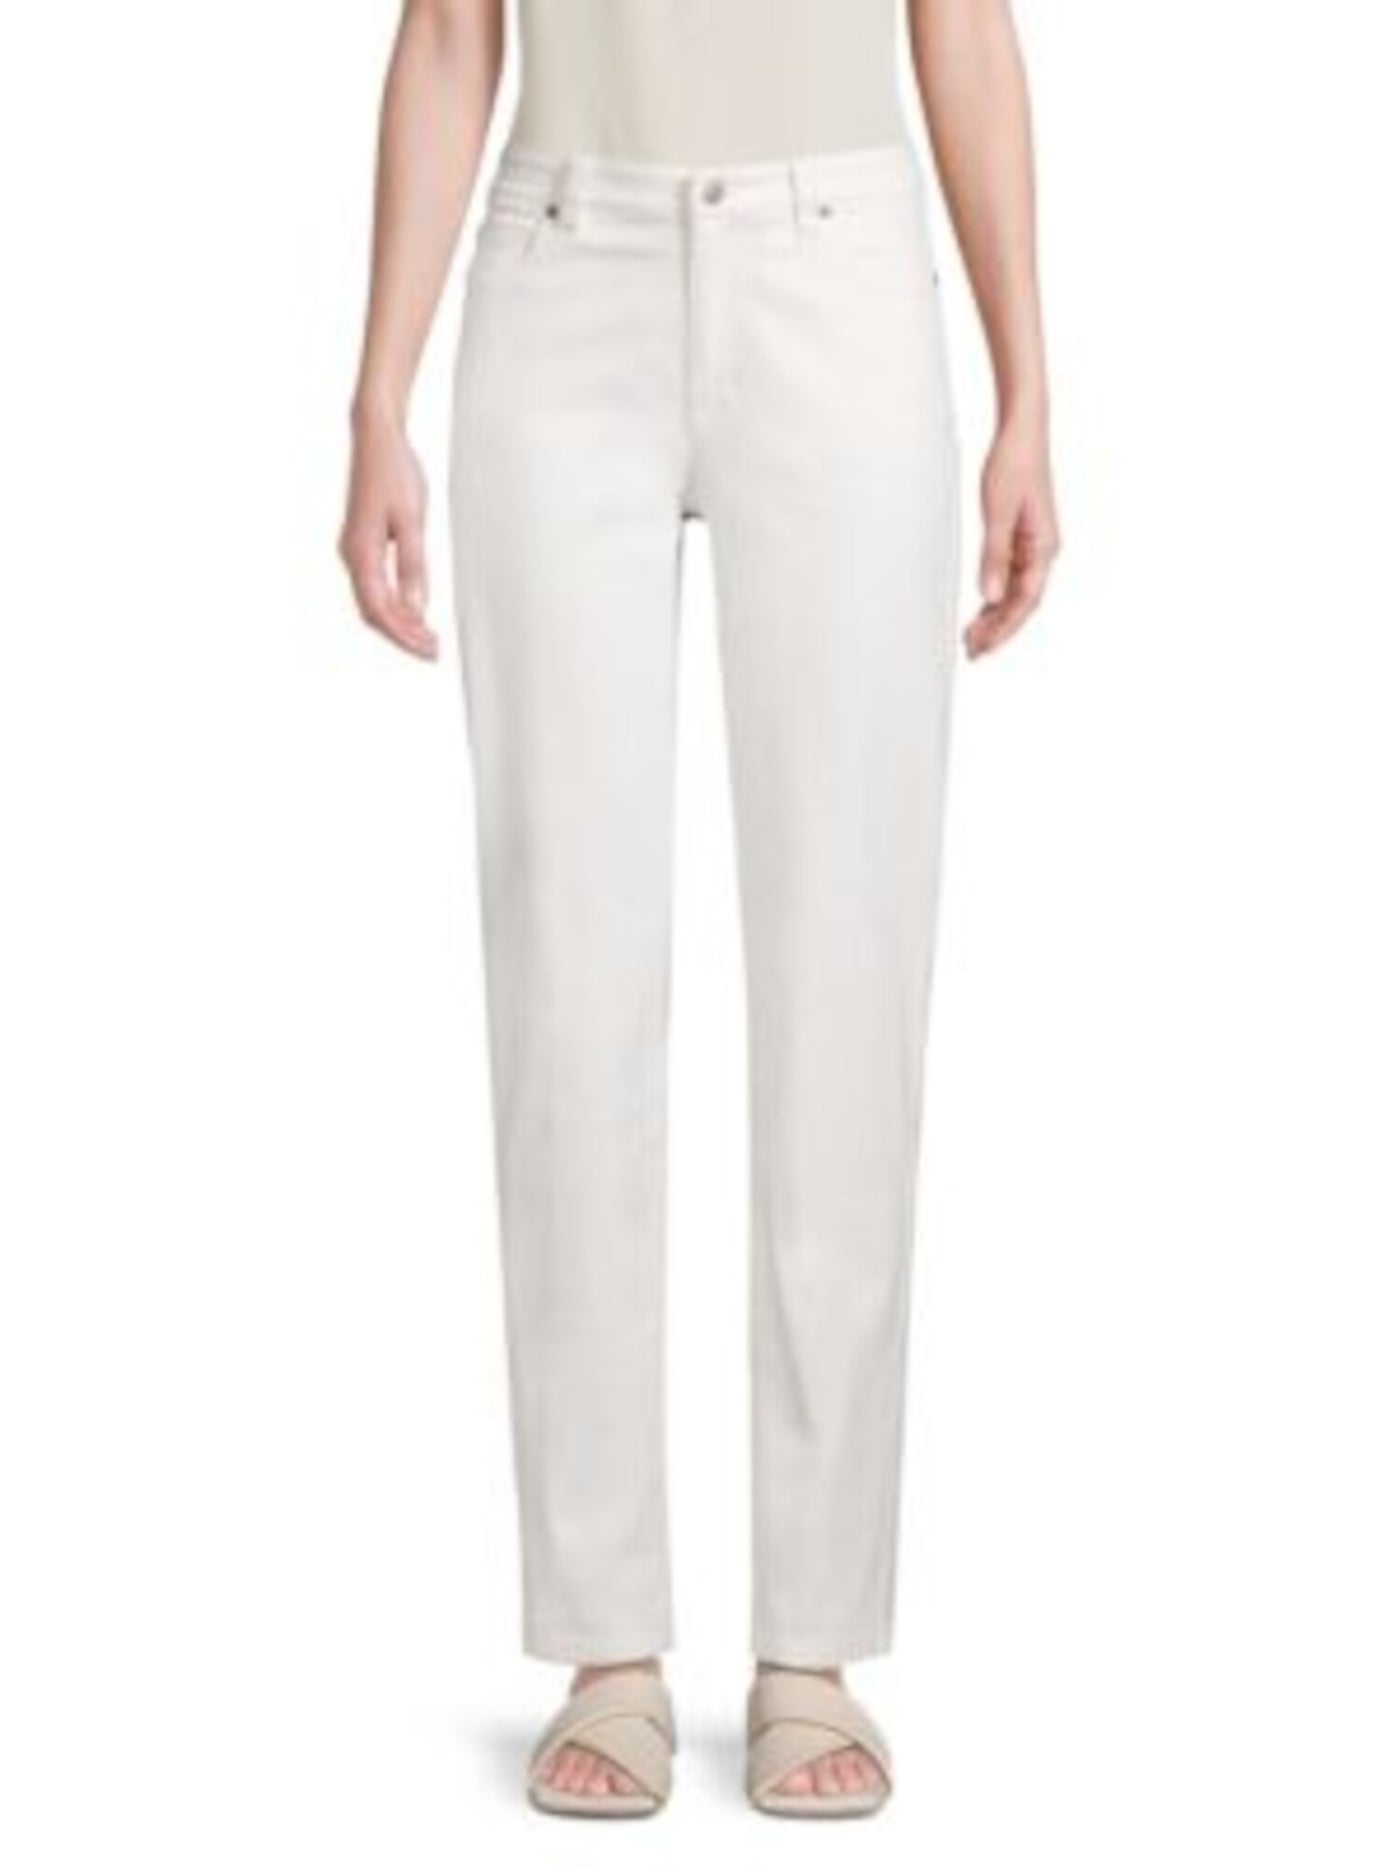 EILEEN FISHER Womens White Cotton Pocketed Zippered Flare Wear To Work High Waist Pants 4